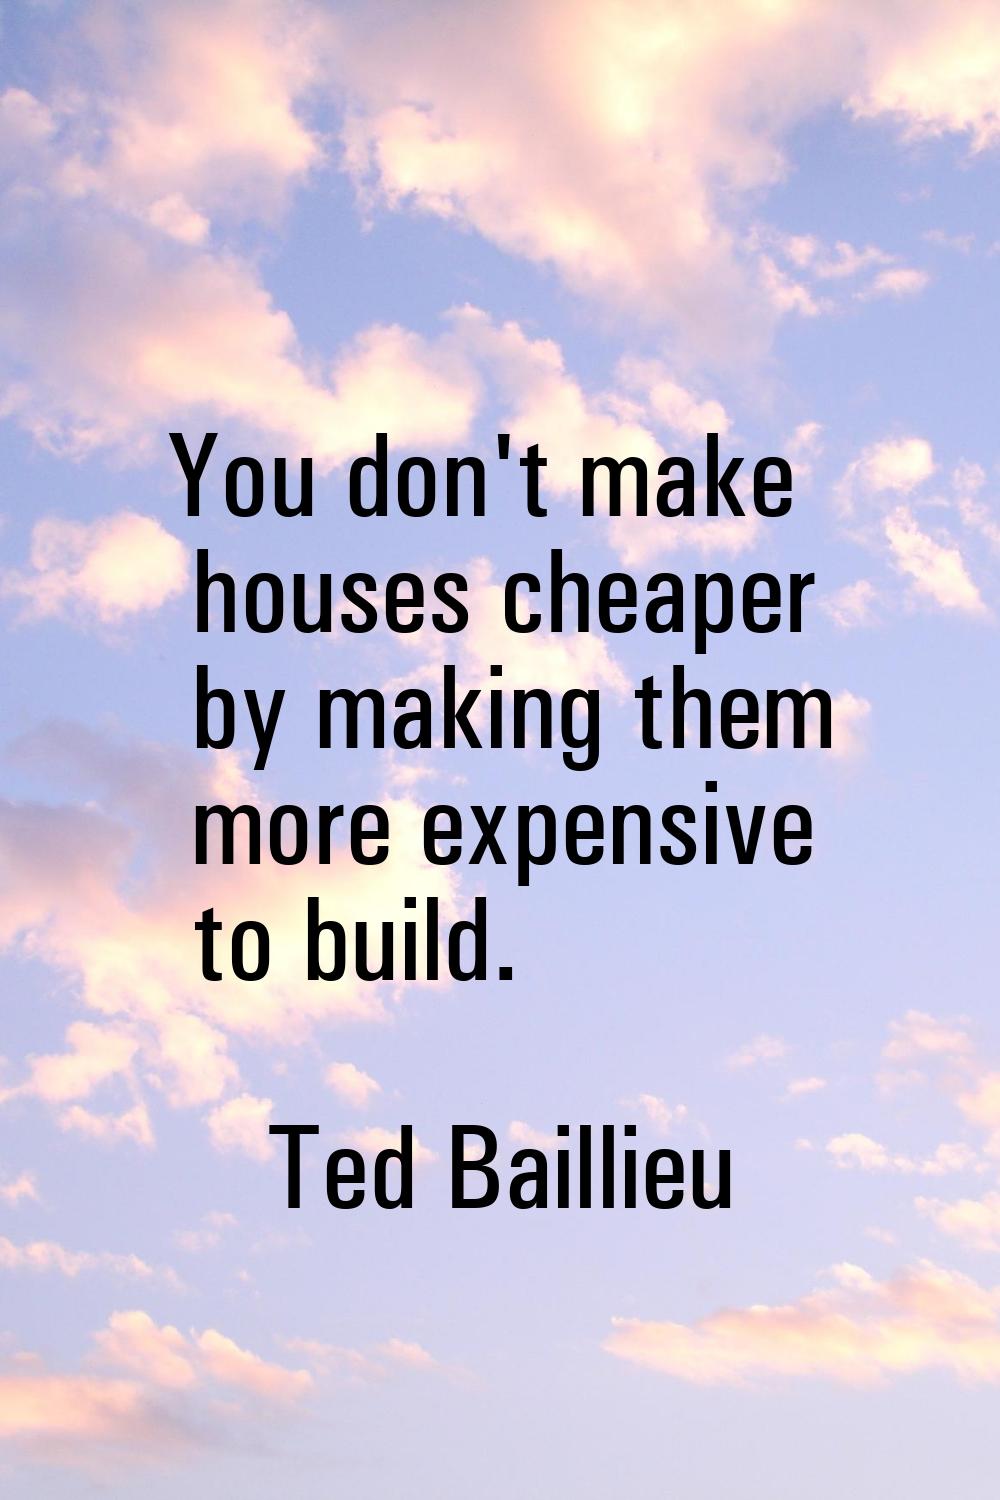 You don't make houses cheaper by making them more expensive to build.